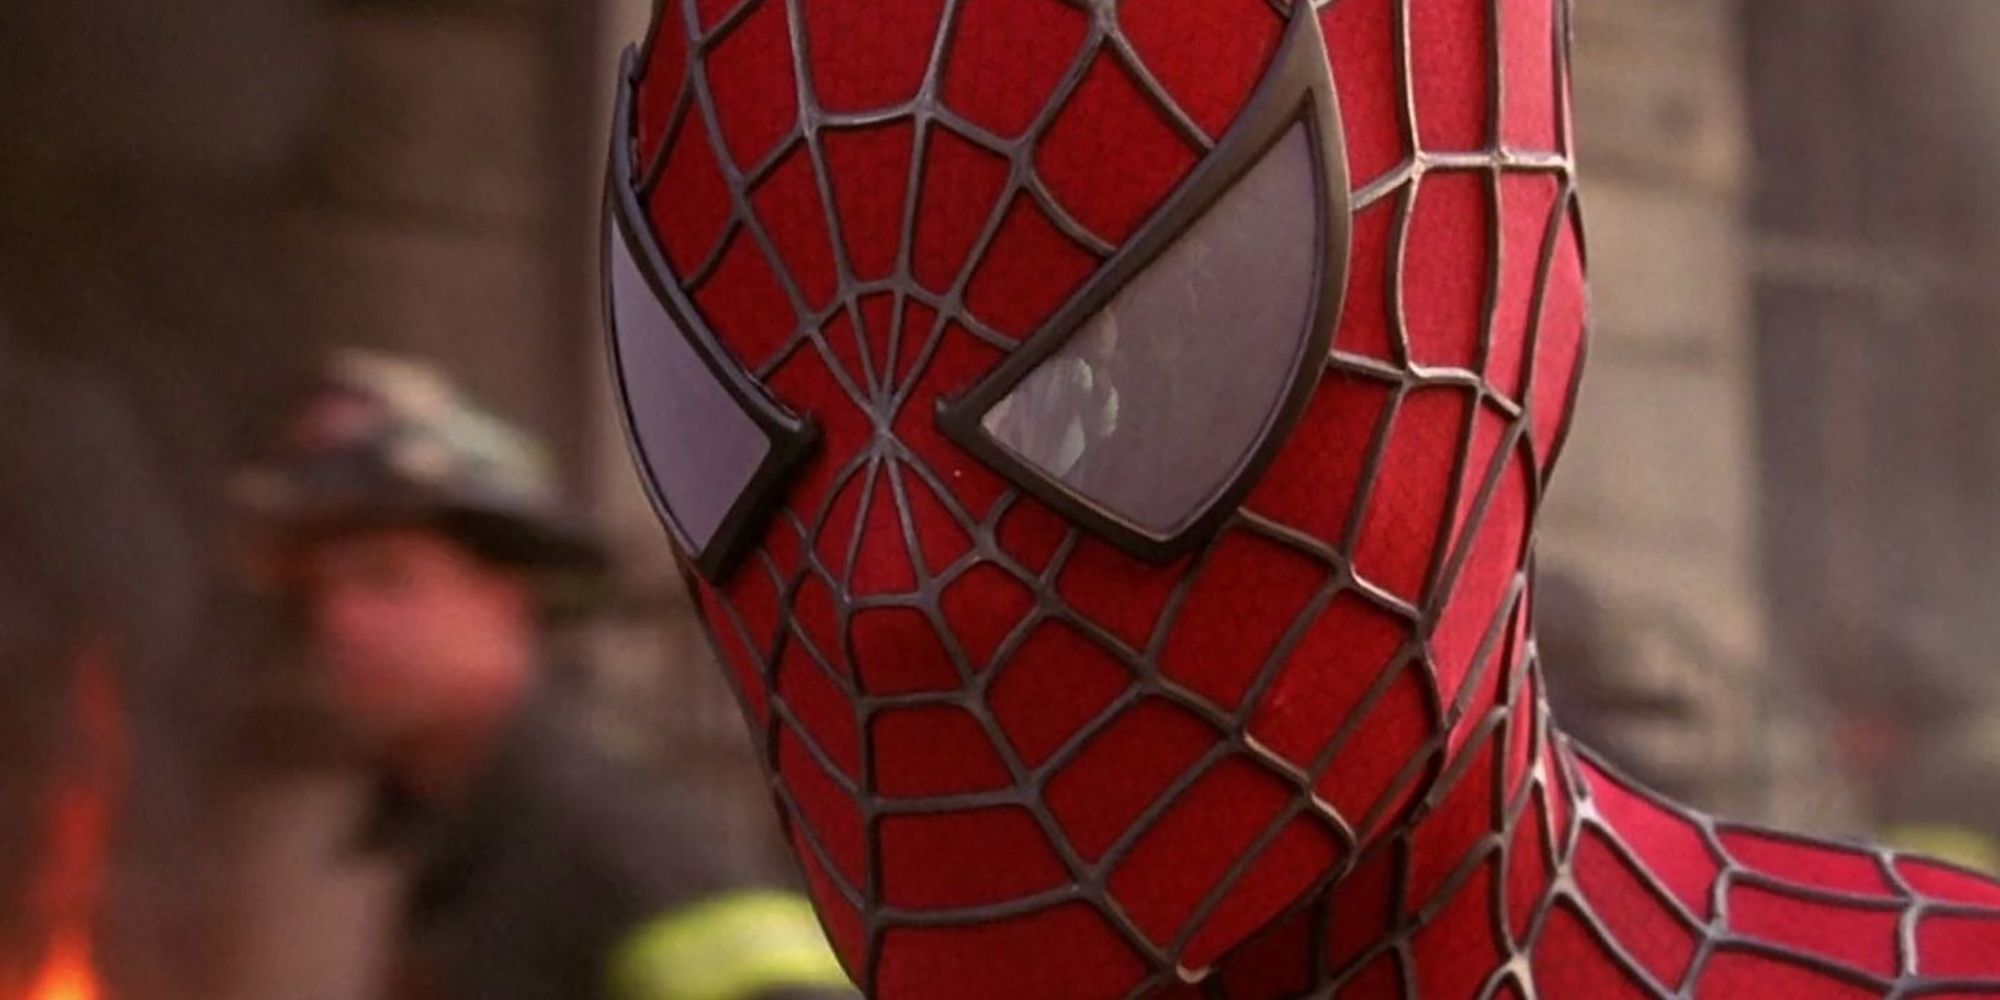 An Image From The Spider-Man Trilogy